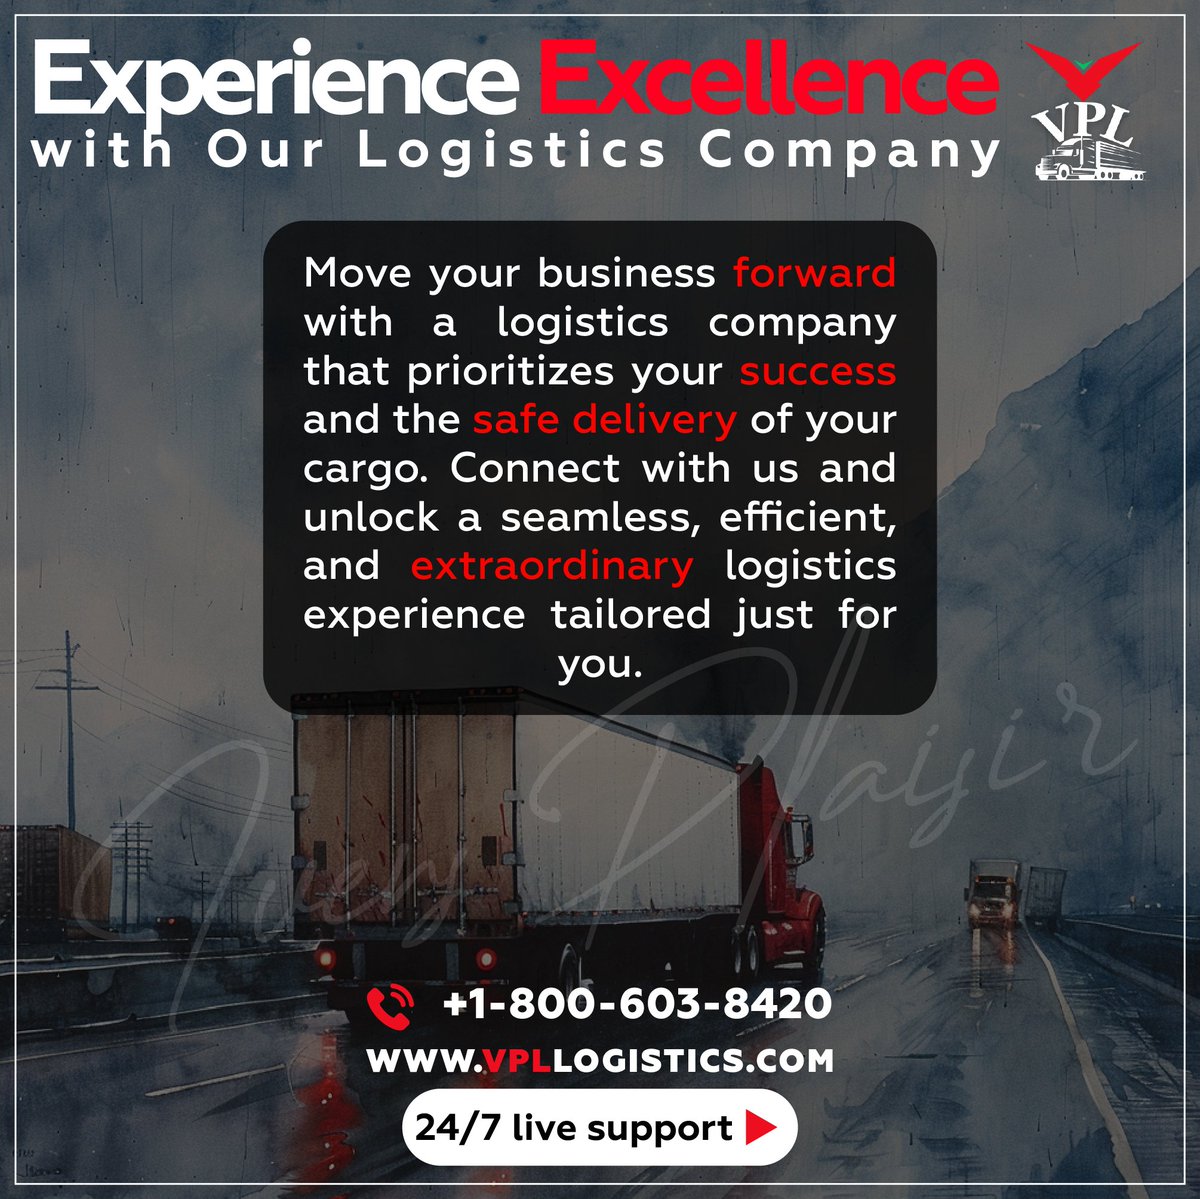 Experience Excellence with Our Logistics Company

#freight #TransportationServices #freightagent